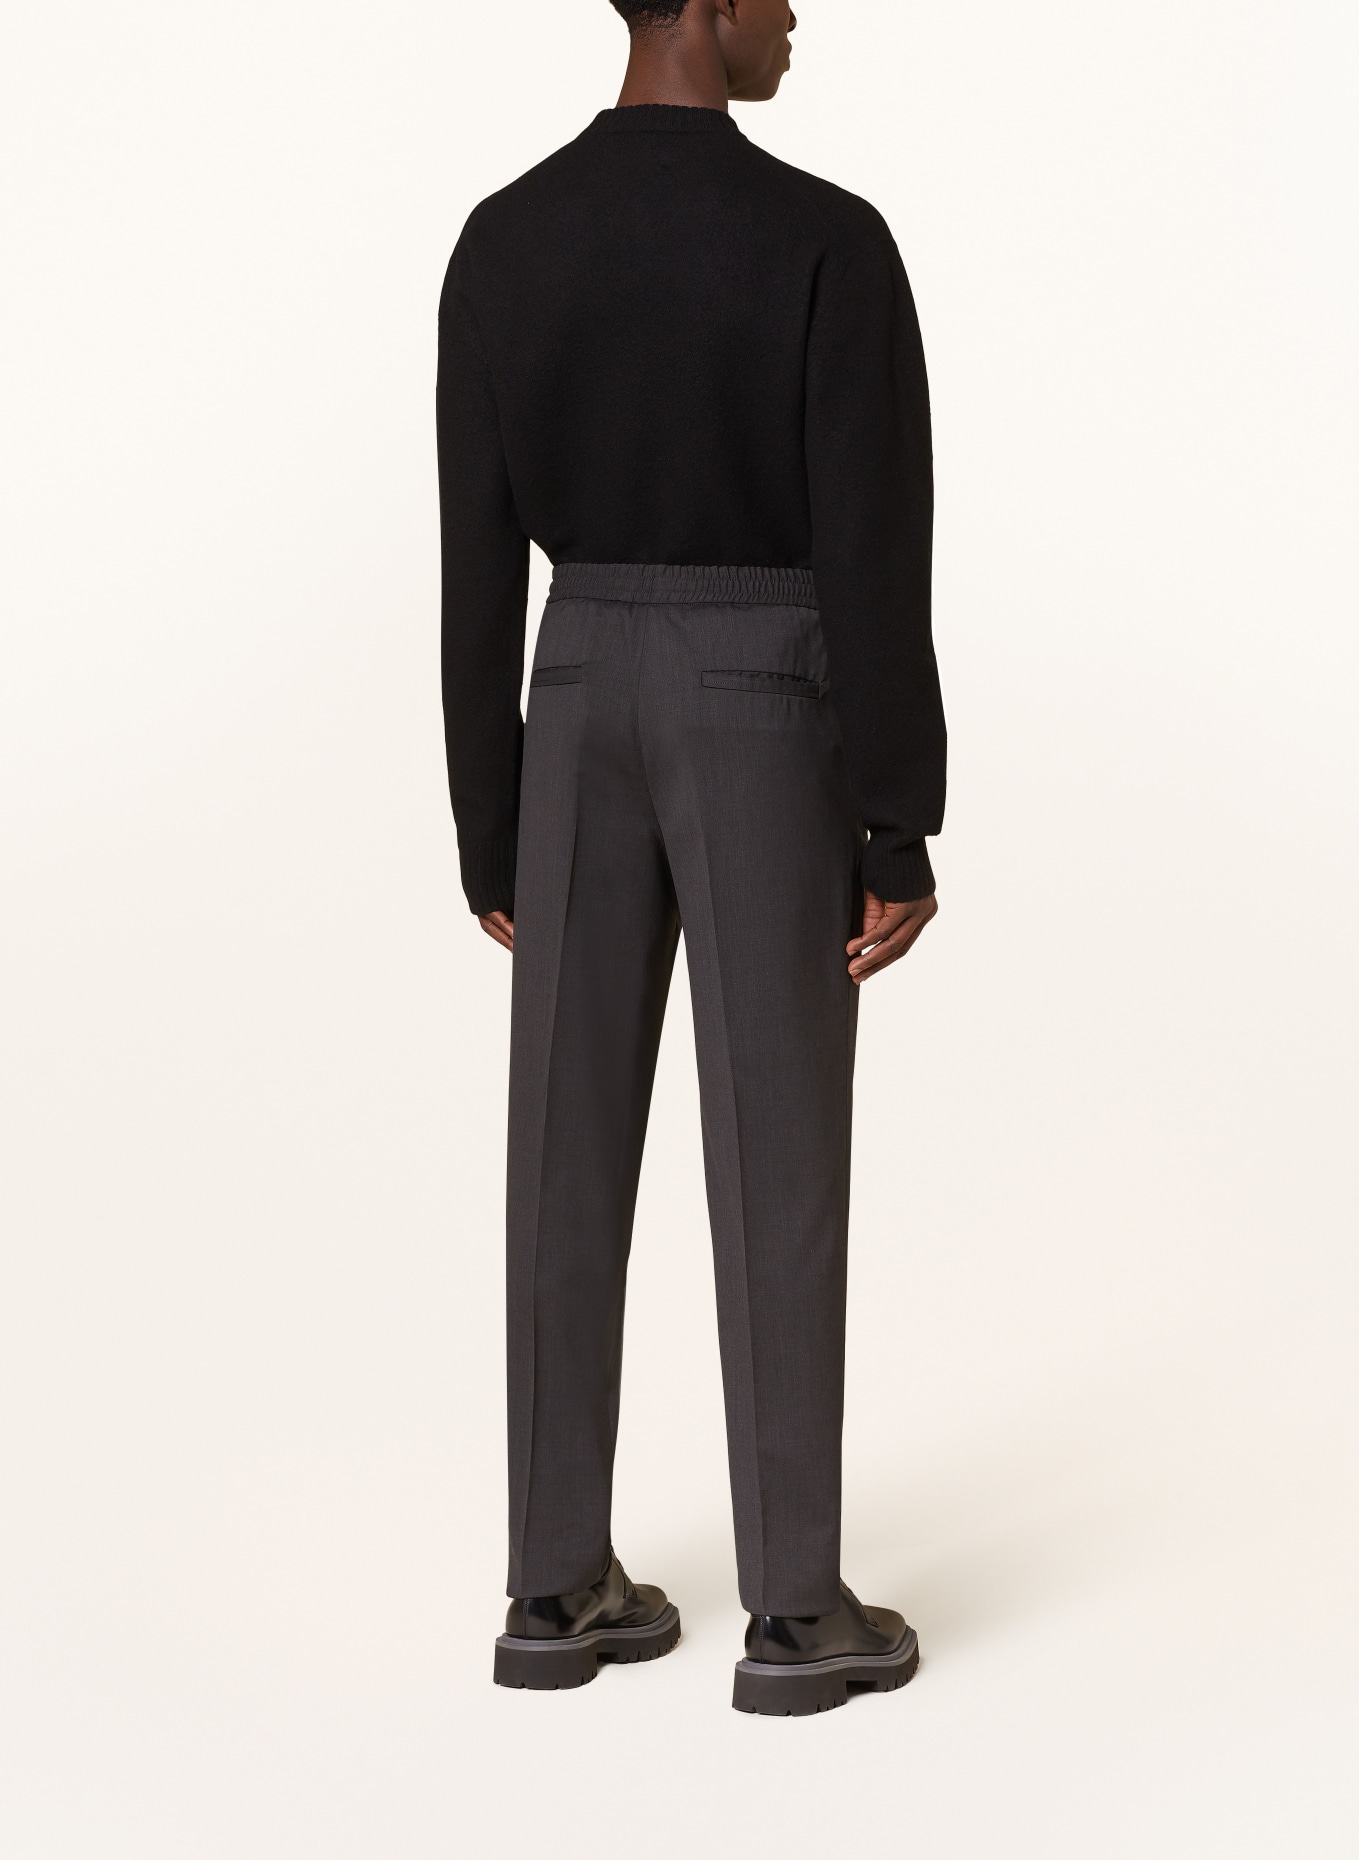 ZEGNA Pants in jogger style extra slim fit, Color: 3A7 Anthra (Image 3)